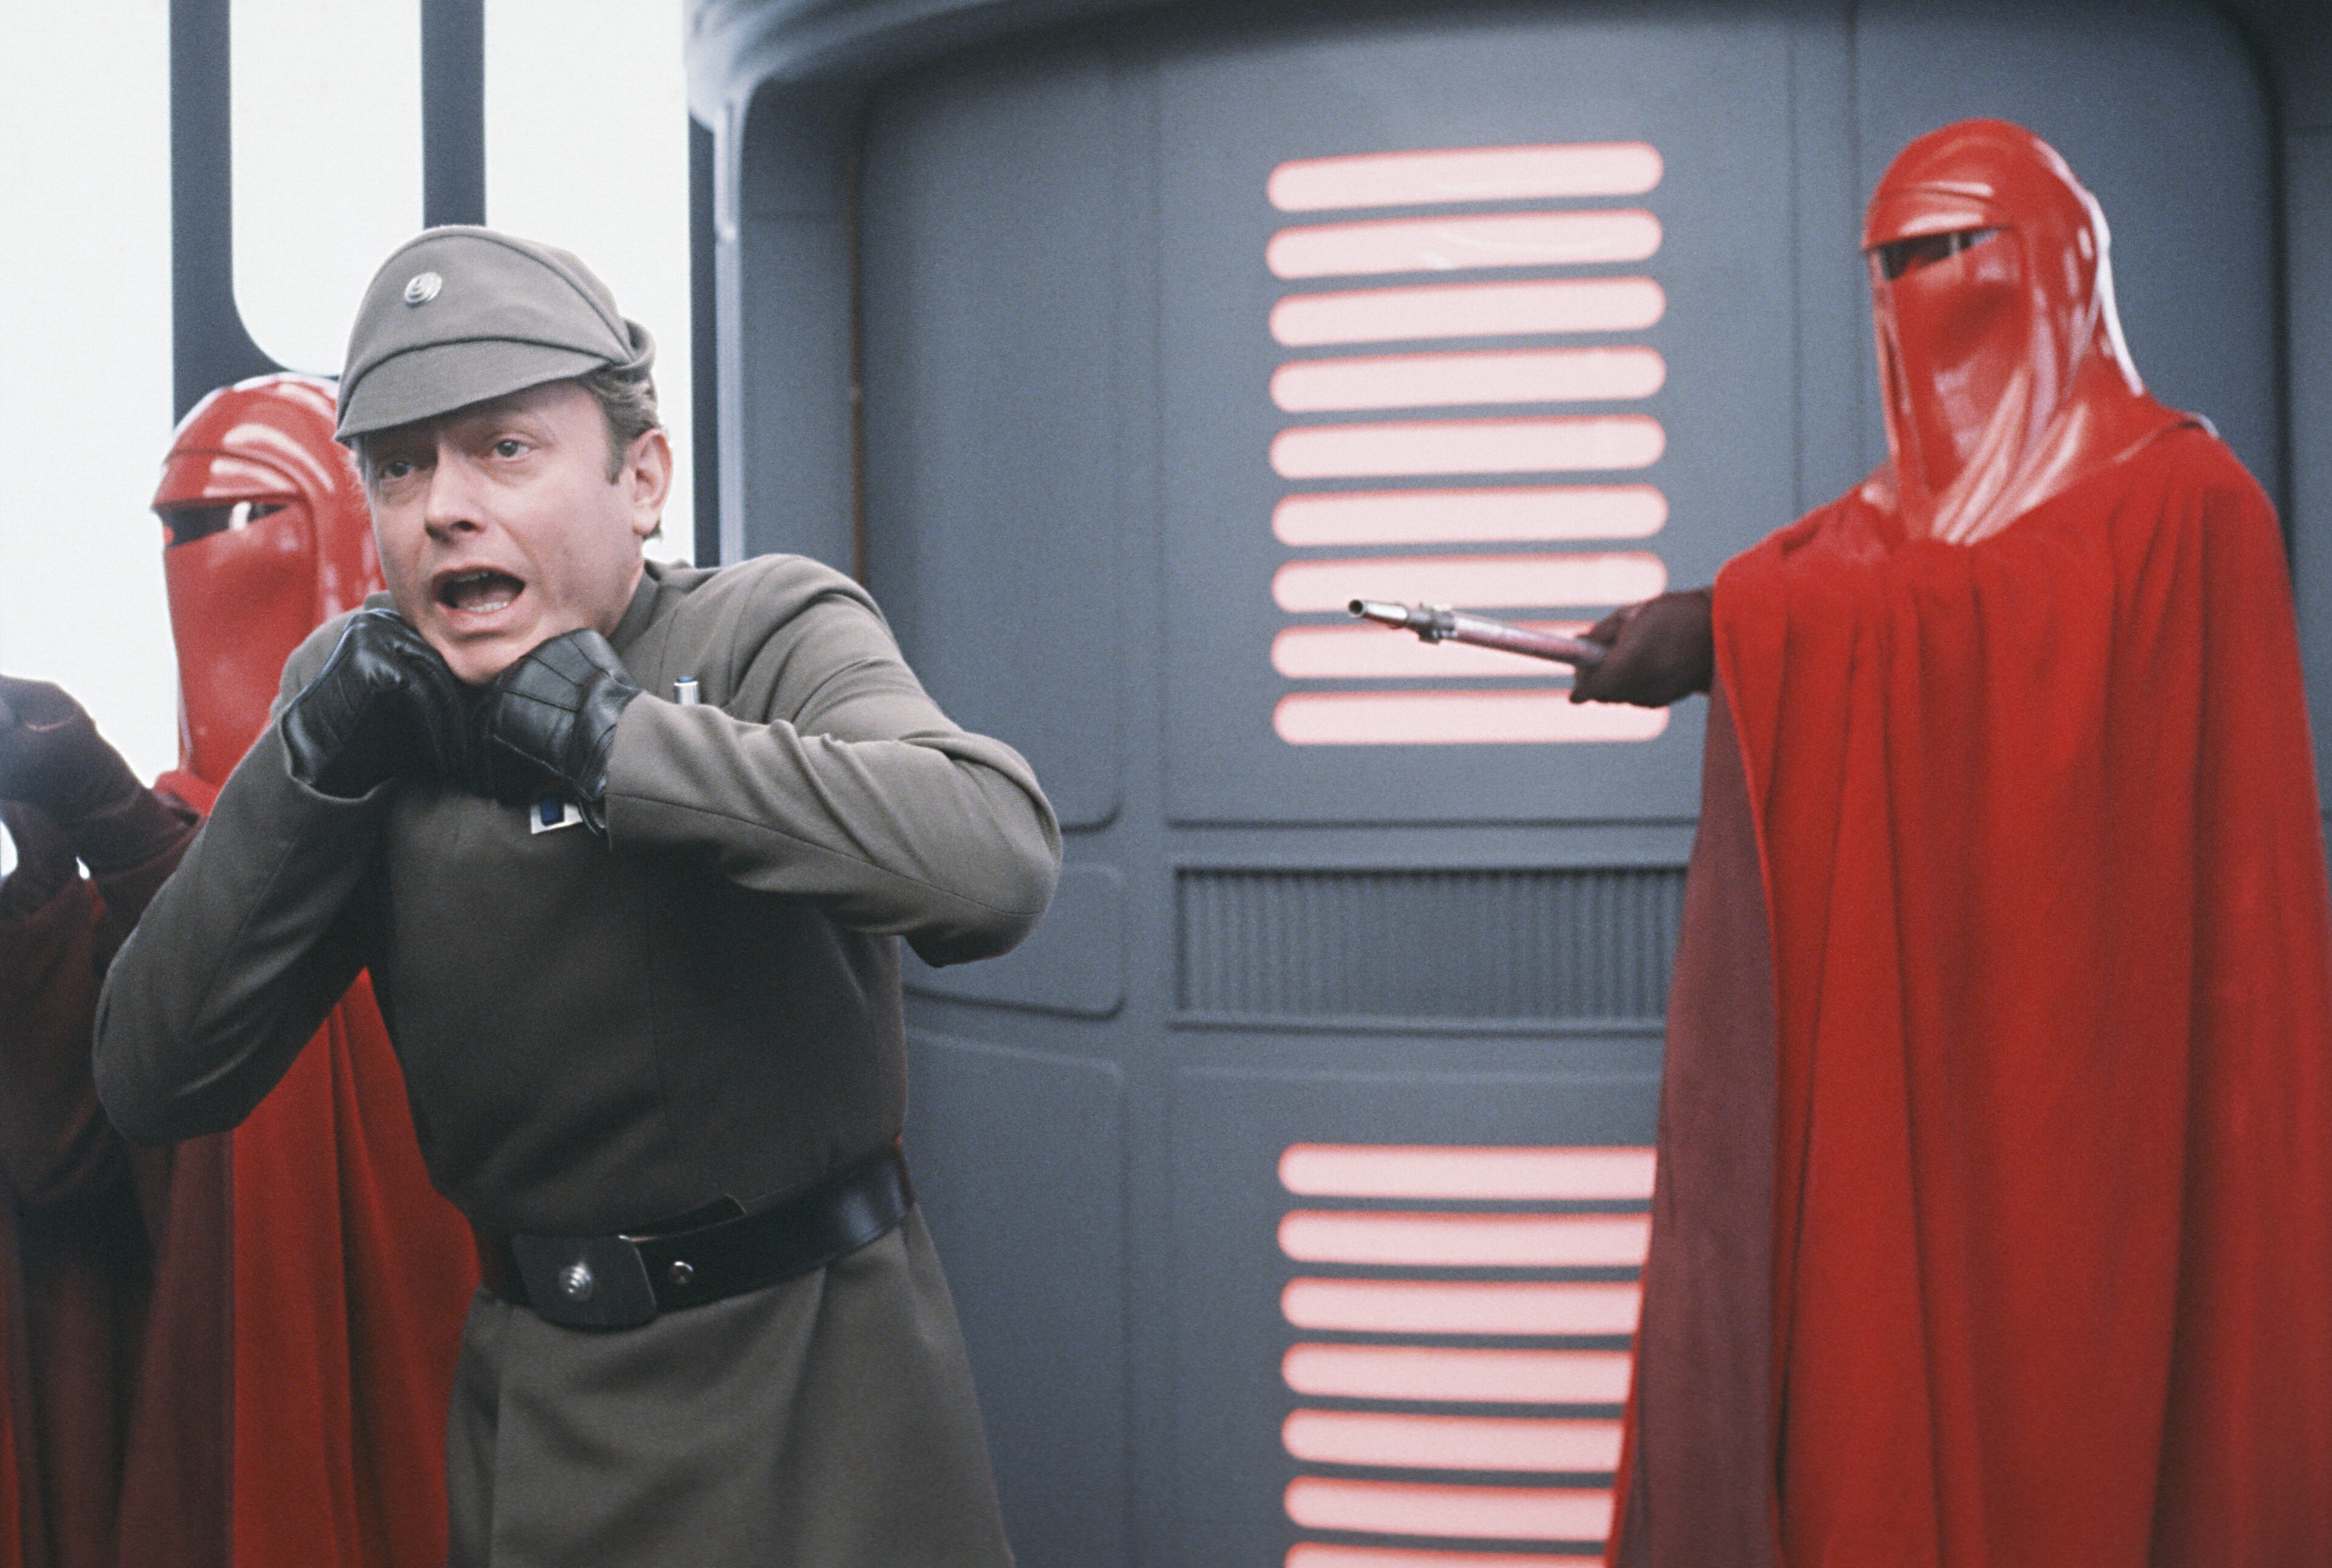 In another deleted scene, Darth Vader Force chokes a Death Star commander, while Imperial Guards ...